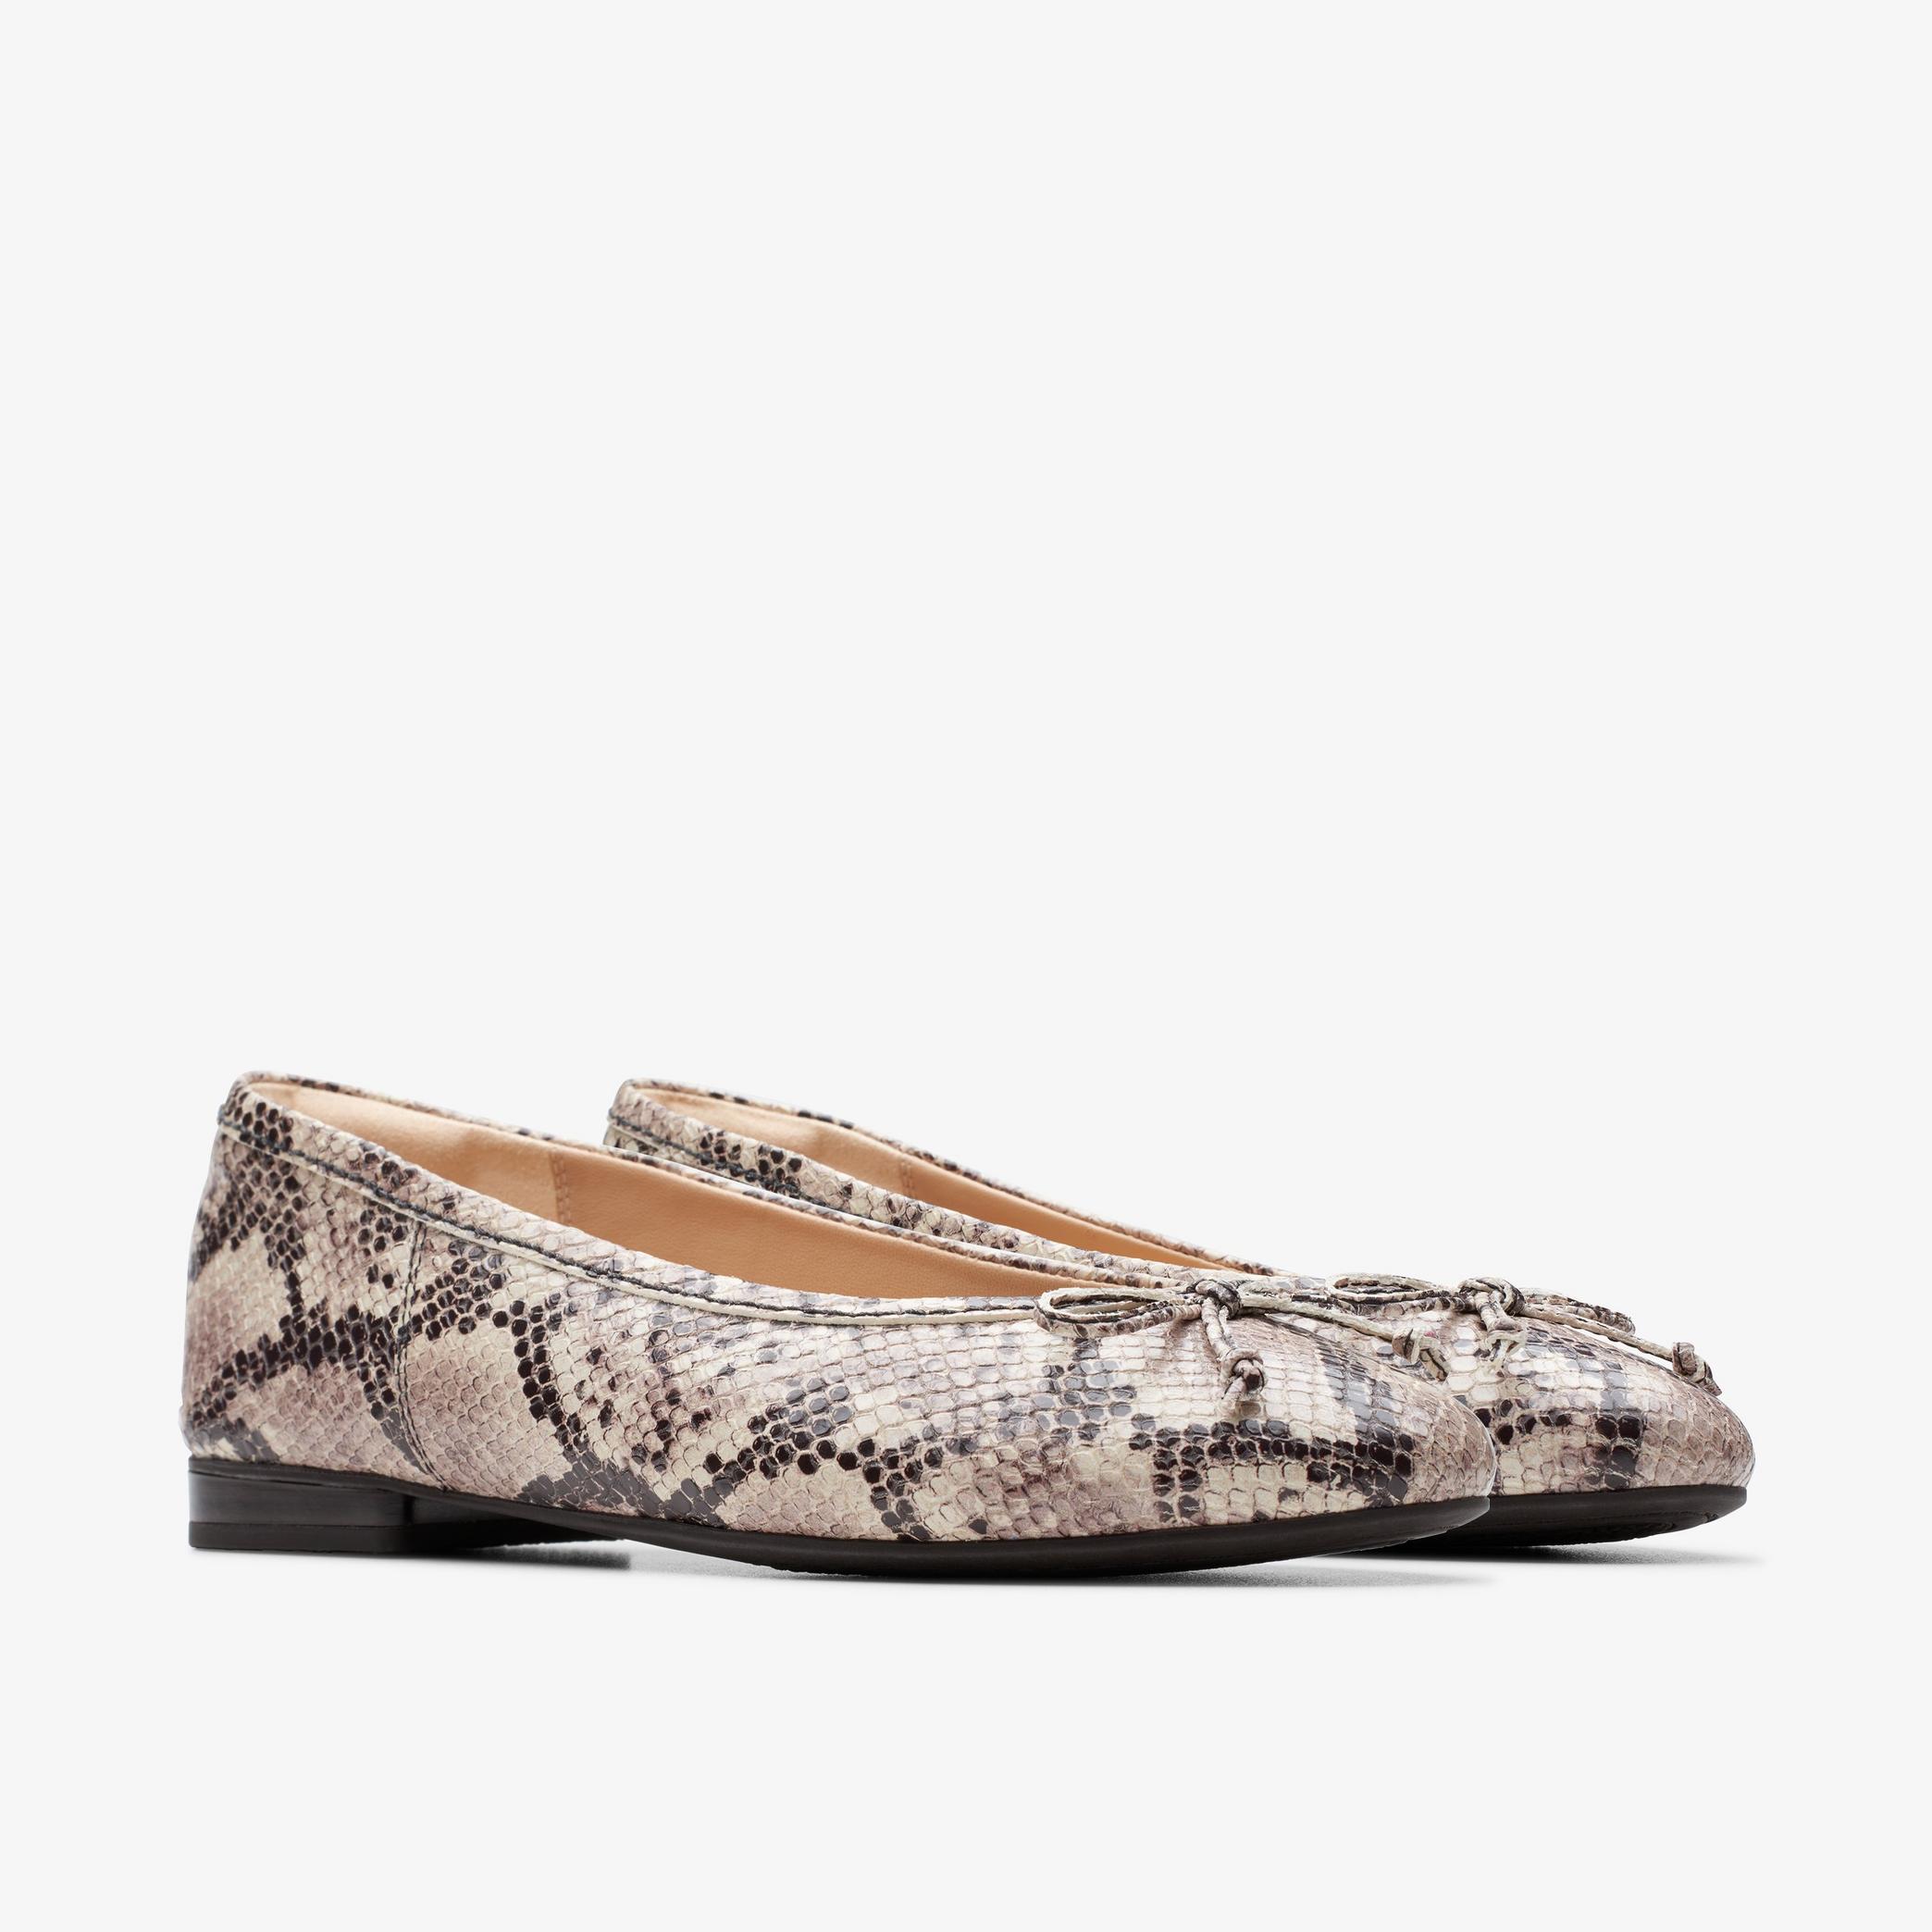 Fawna Lily Snake Print Ballerina, view 4 of 7